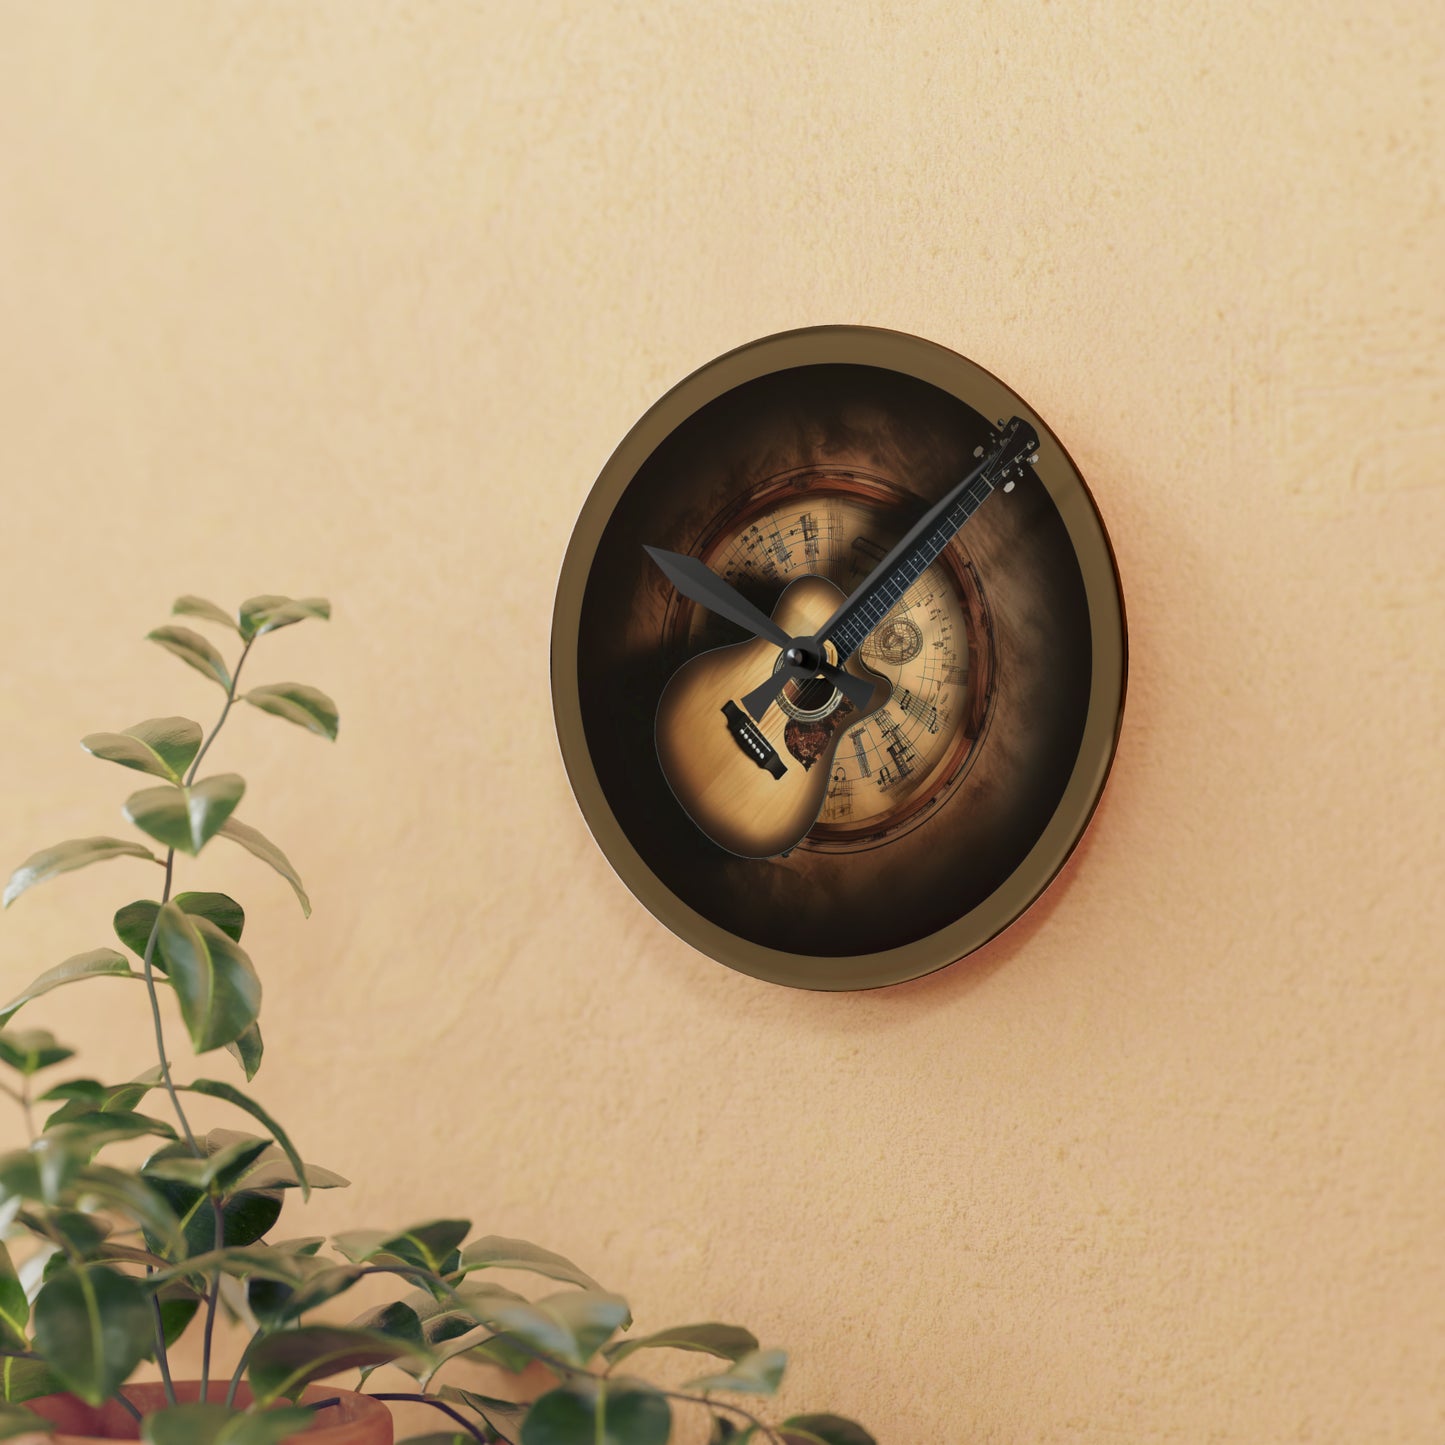 Wall Clock with Acoustic Guitar, Music-themed Acrylic Square or Round options, 2 sizes with black clock hands